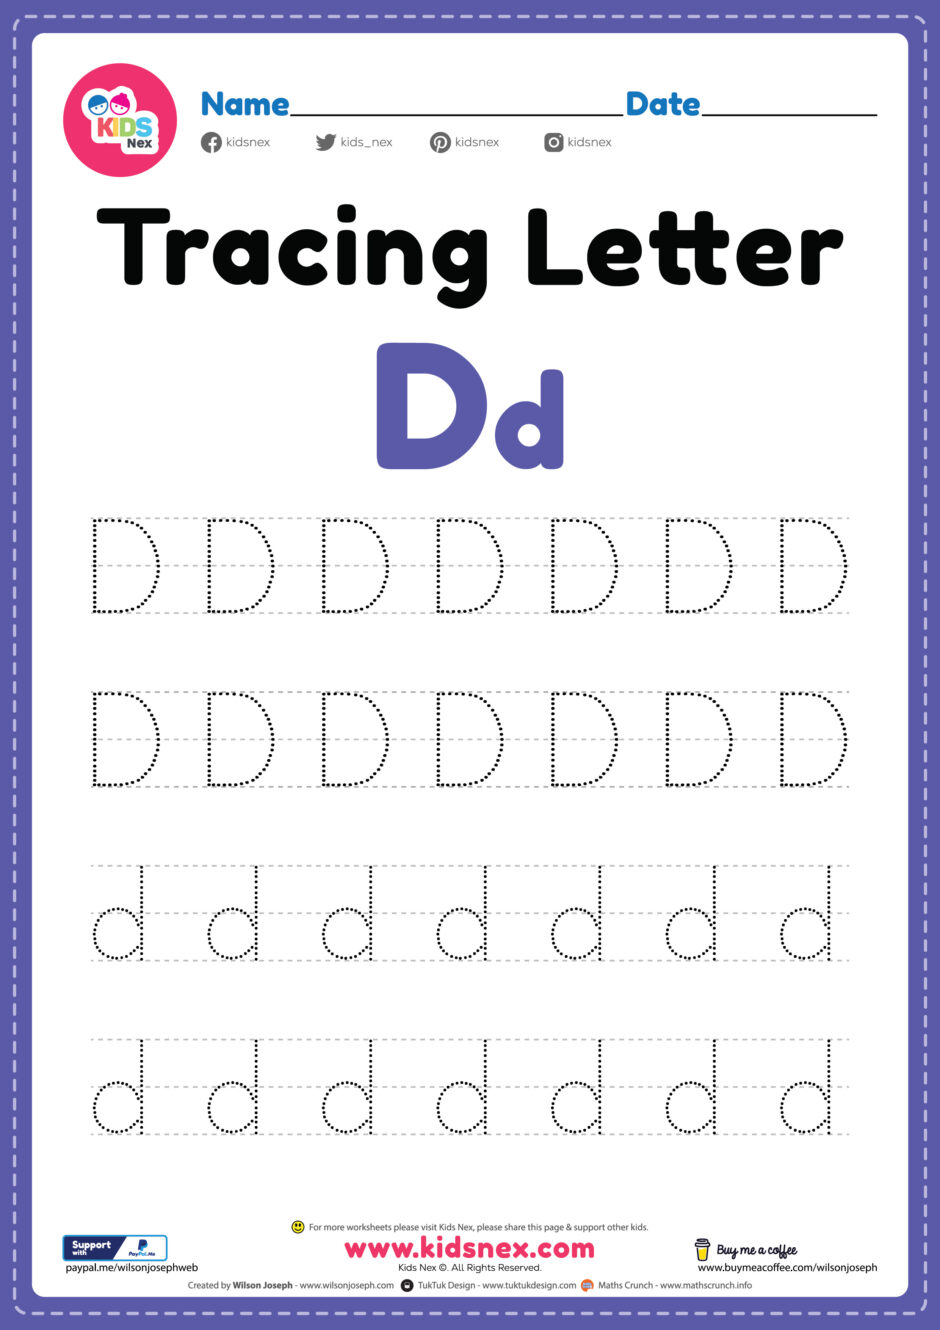 new-practice-writing-the-letter-w-gif-school-info